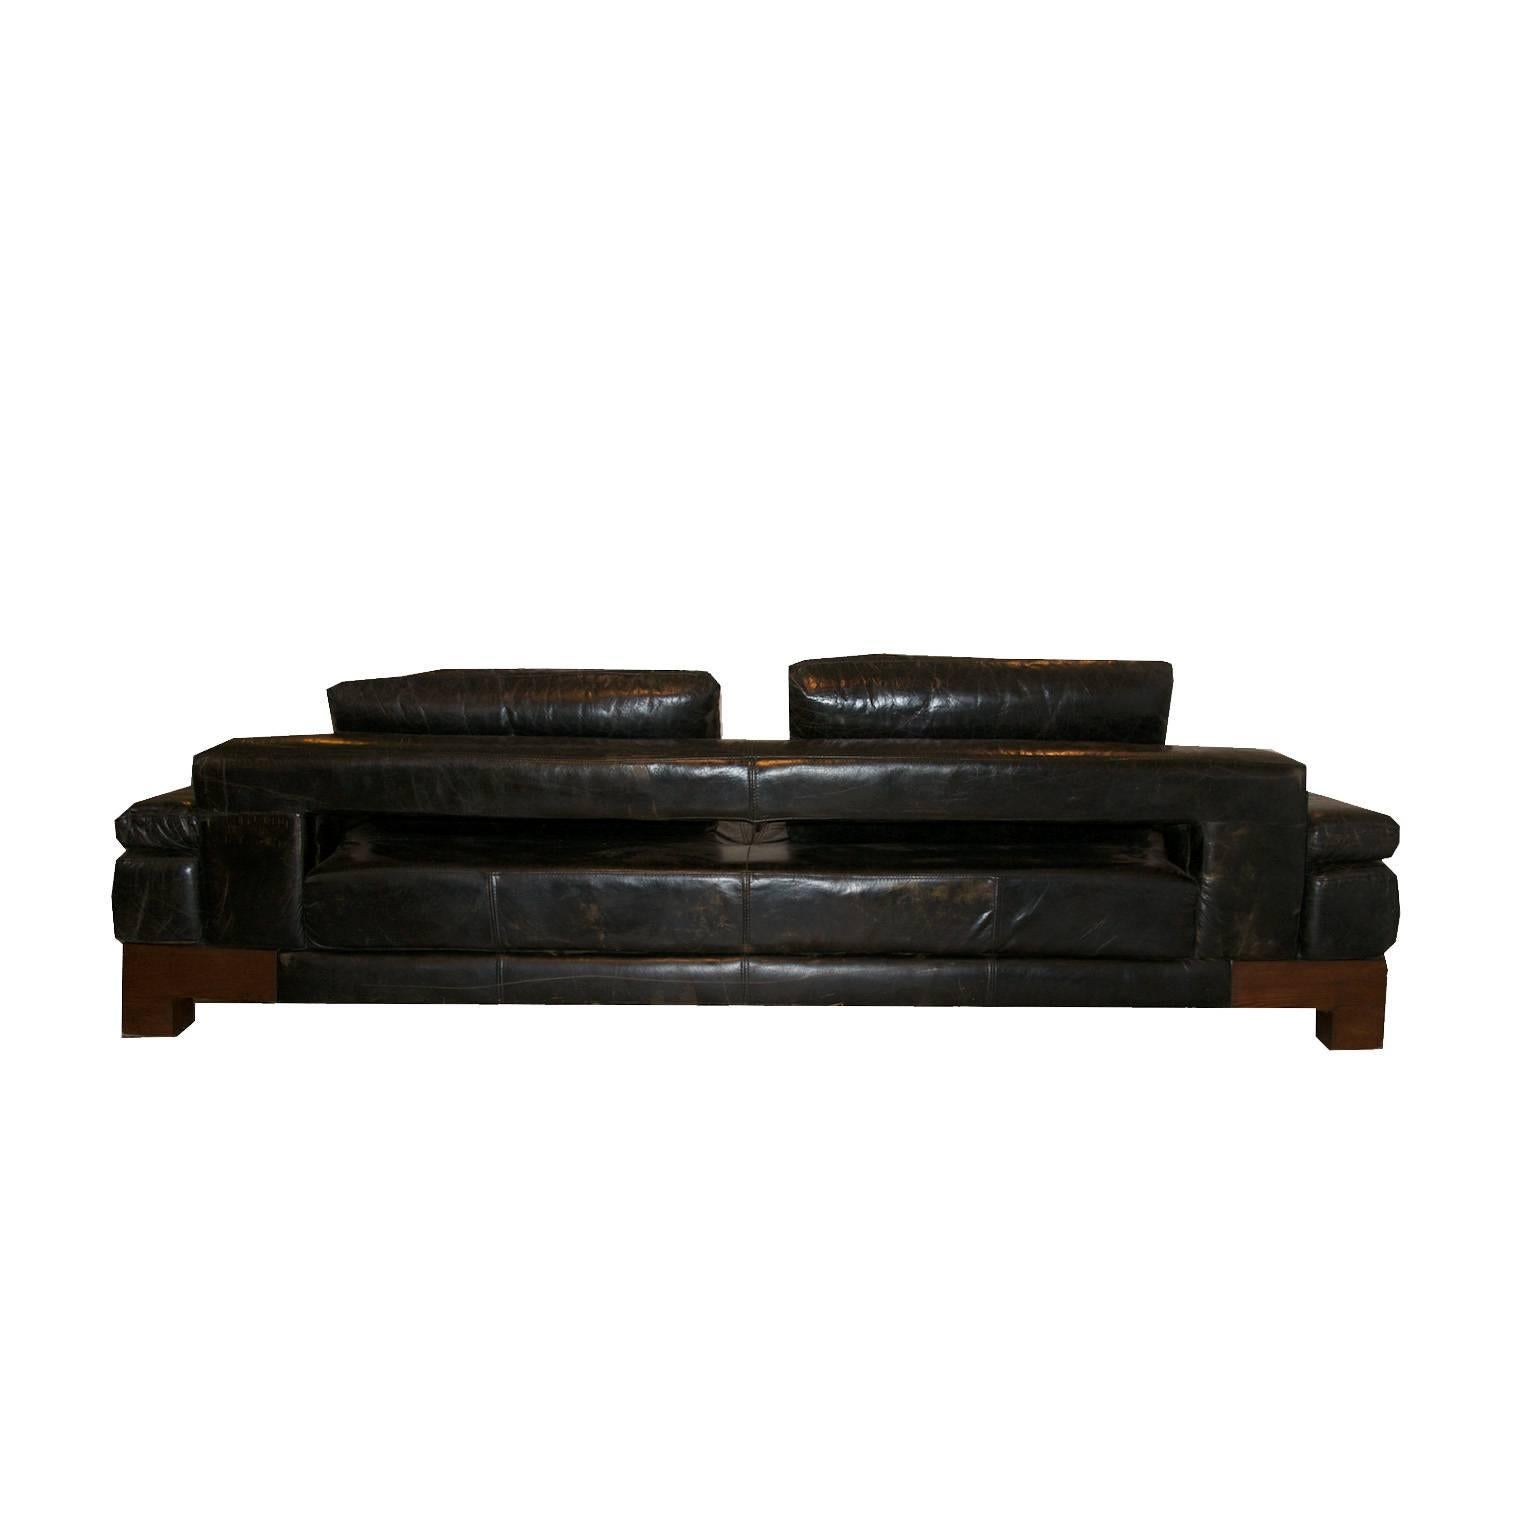 Very stylish black leather sofa.

We still haven’t found its origin, but we think it is Italian made from the 70s. Its base is made of wenge and it is upholstered with thick leather.

We have never seen one before. A very beautiful and exclusive